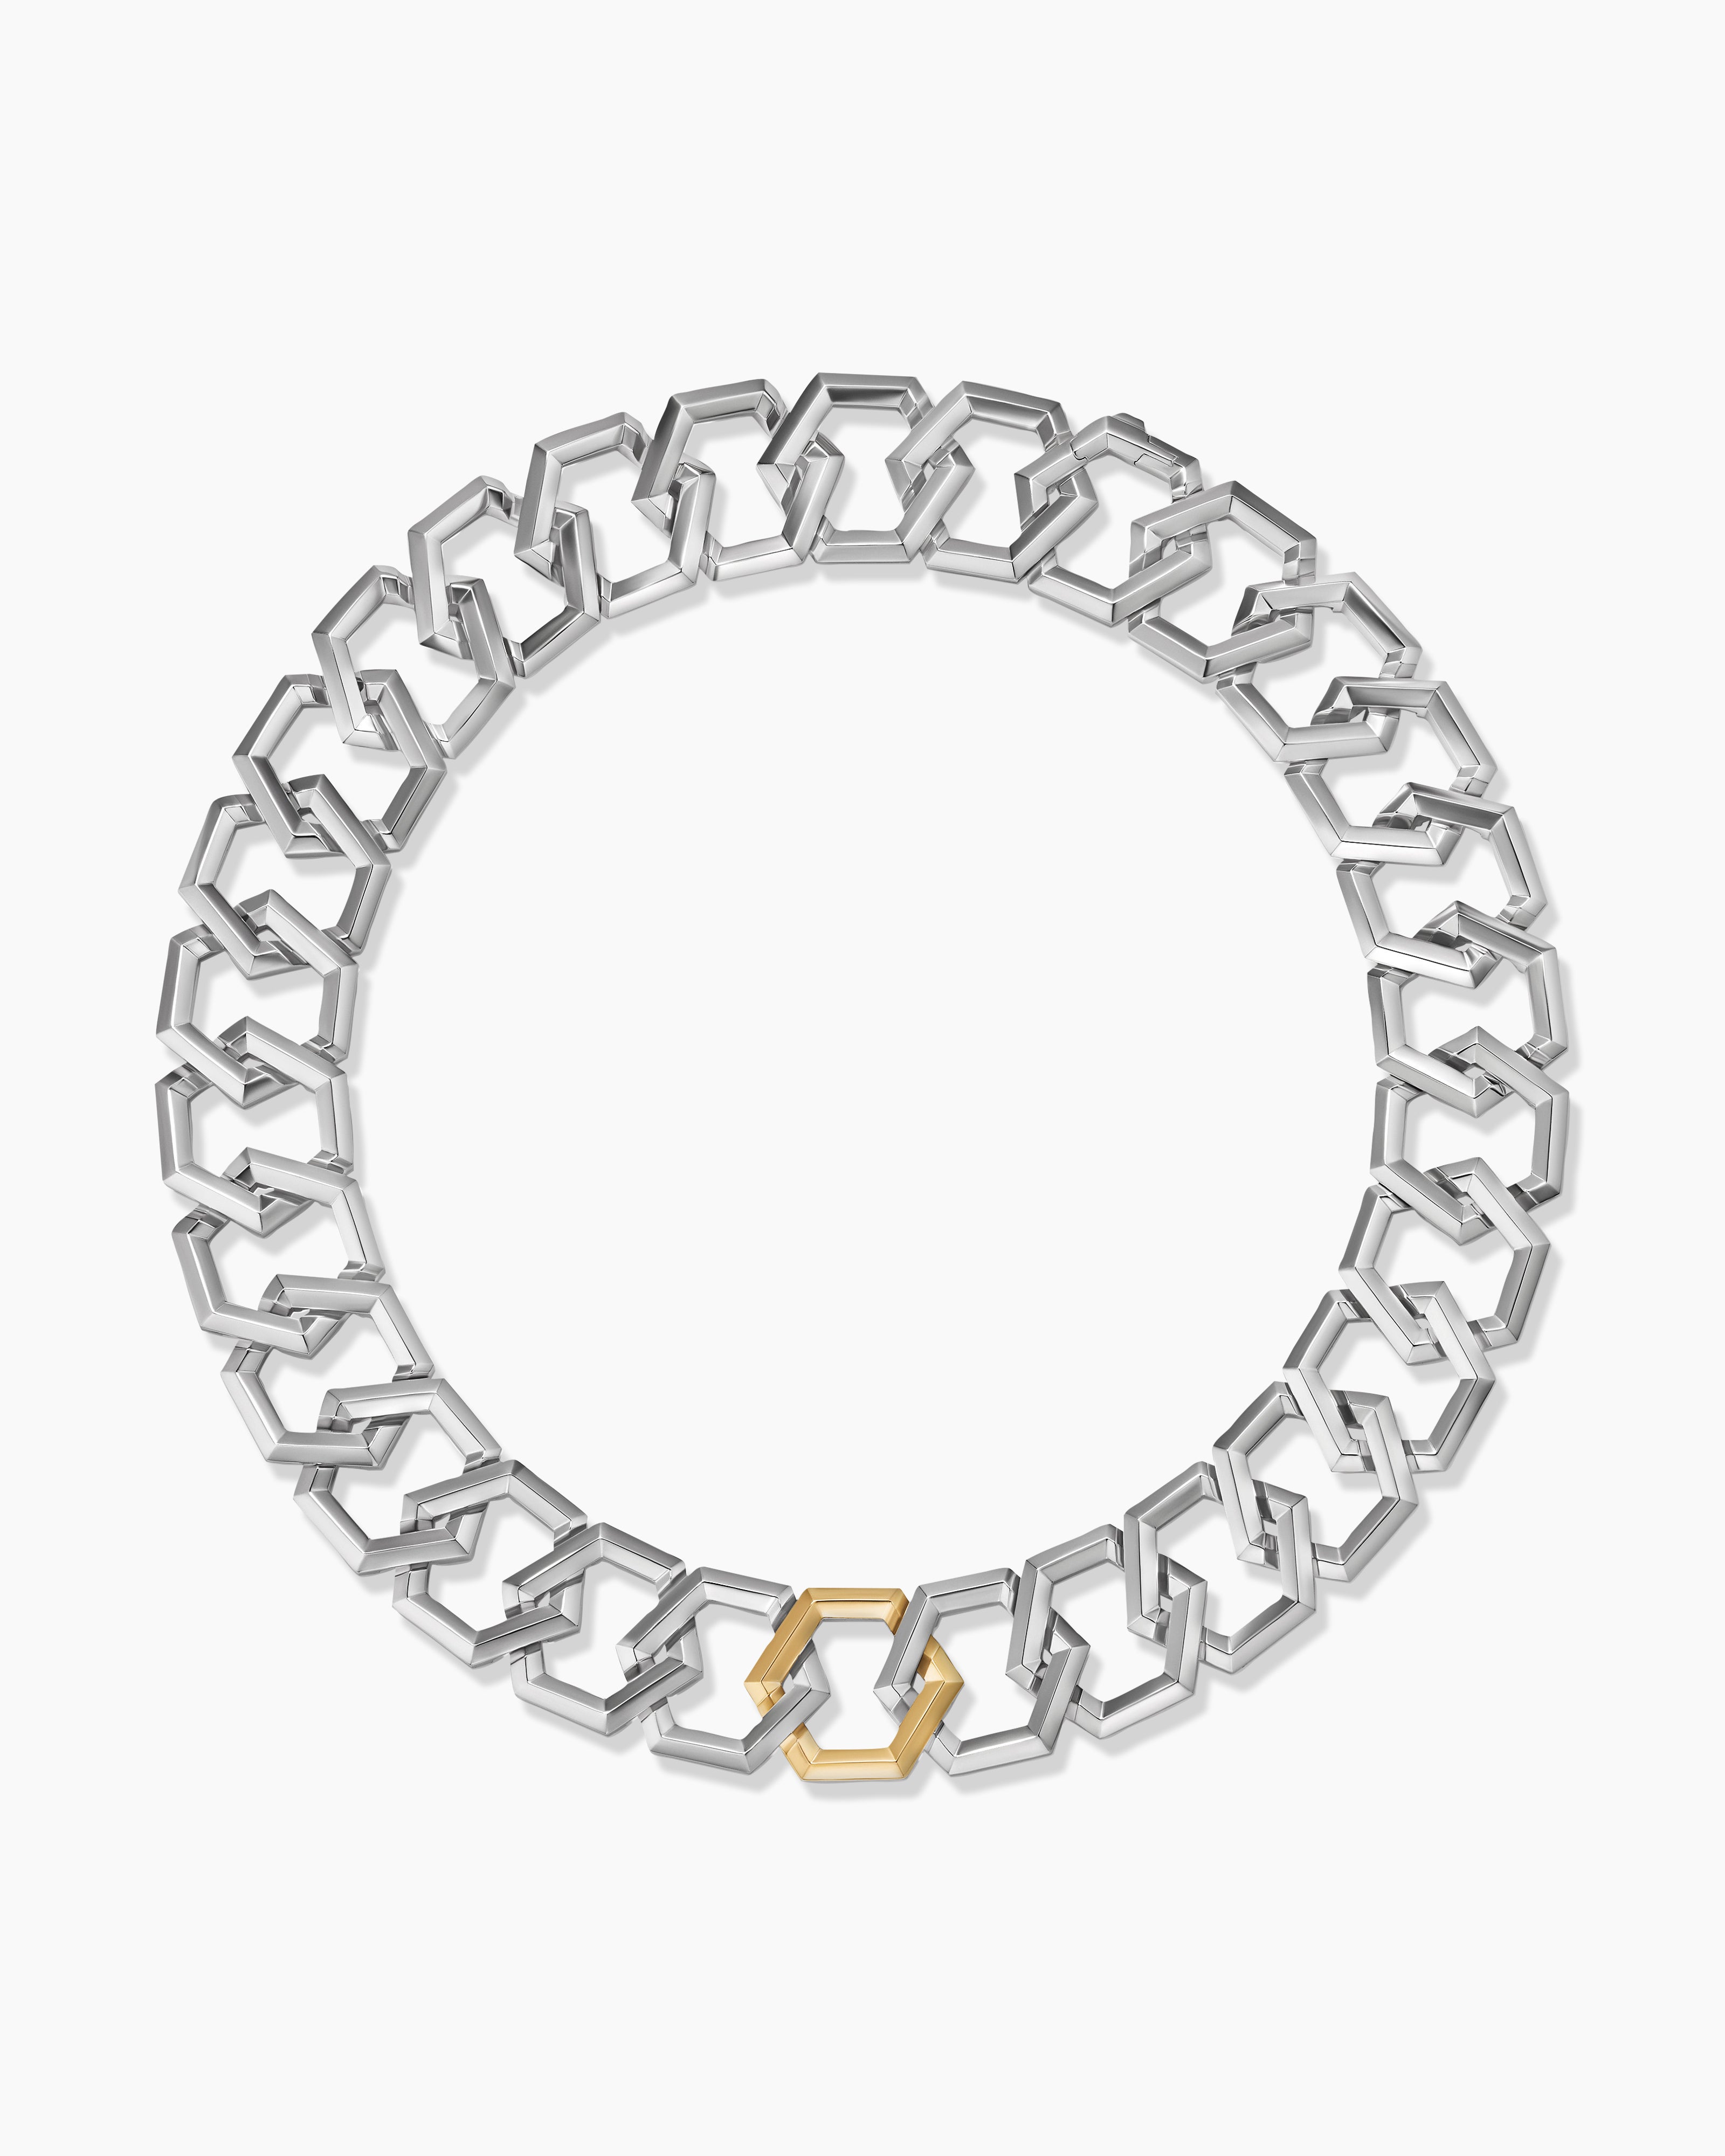 Carlyle™ Necklace in Sterling Silver with 18K Yellow Gold, 24mm | David  Yurman